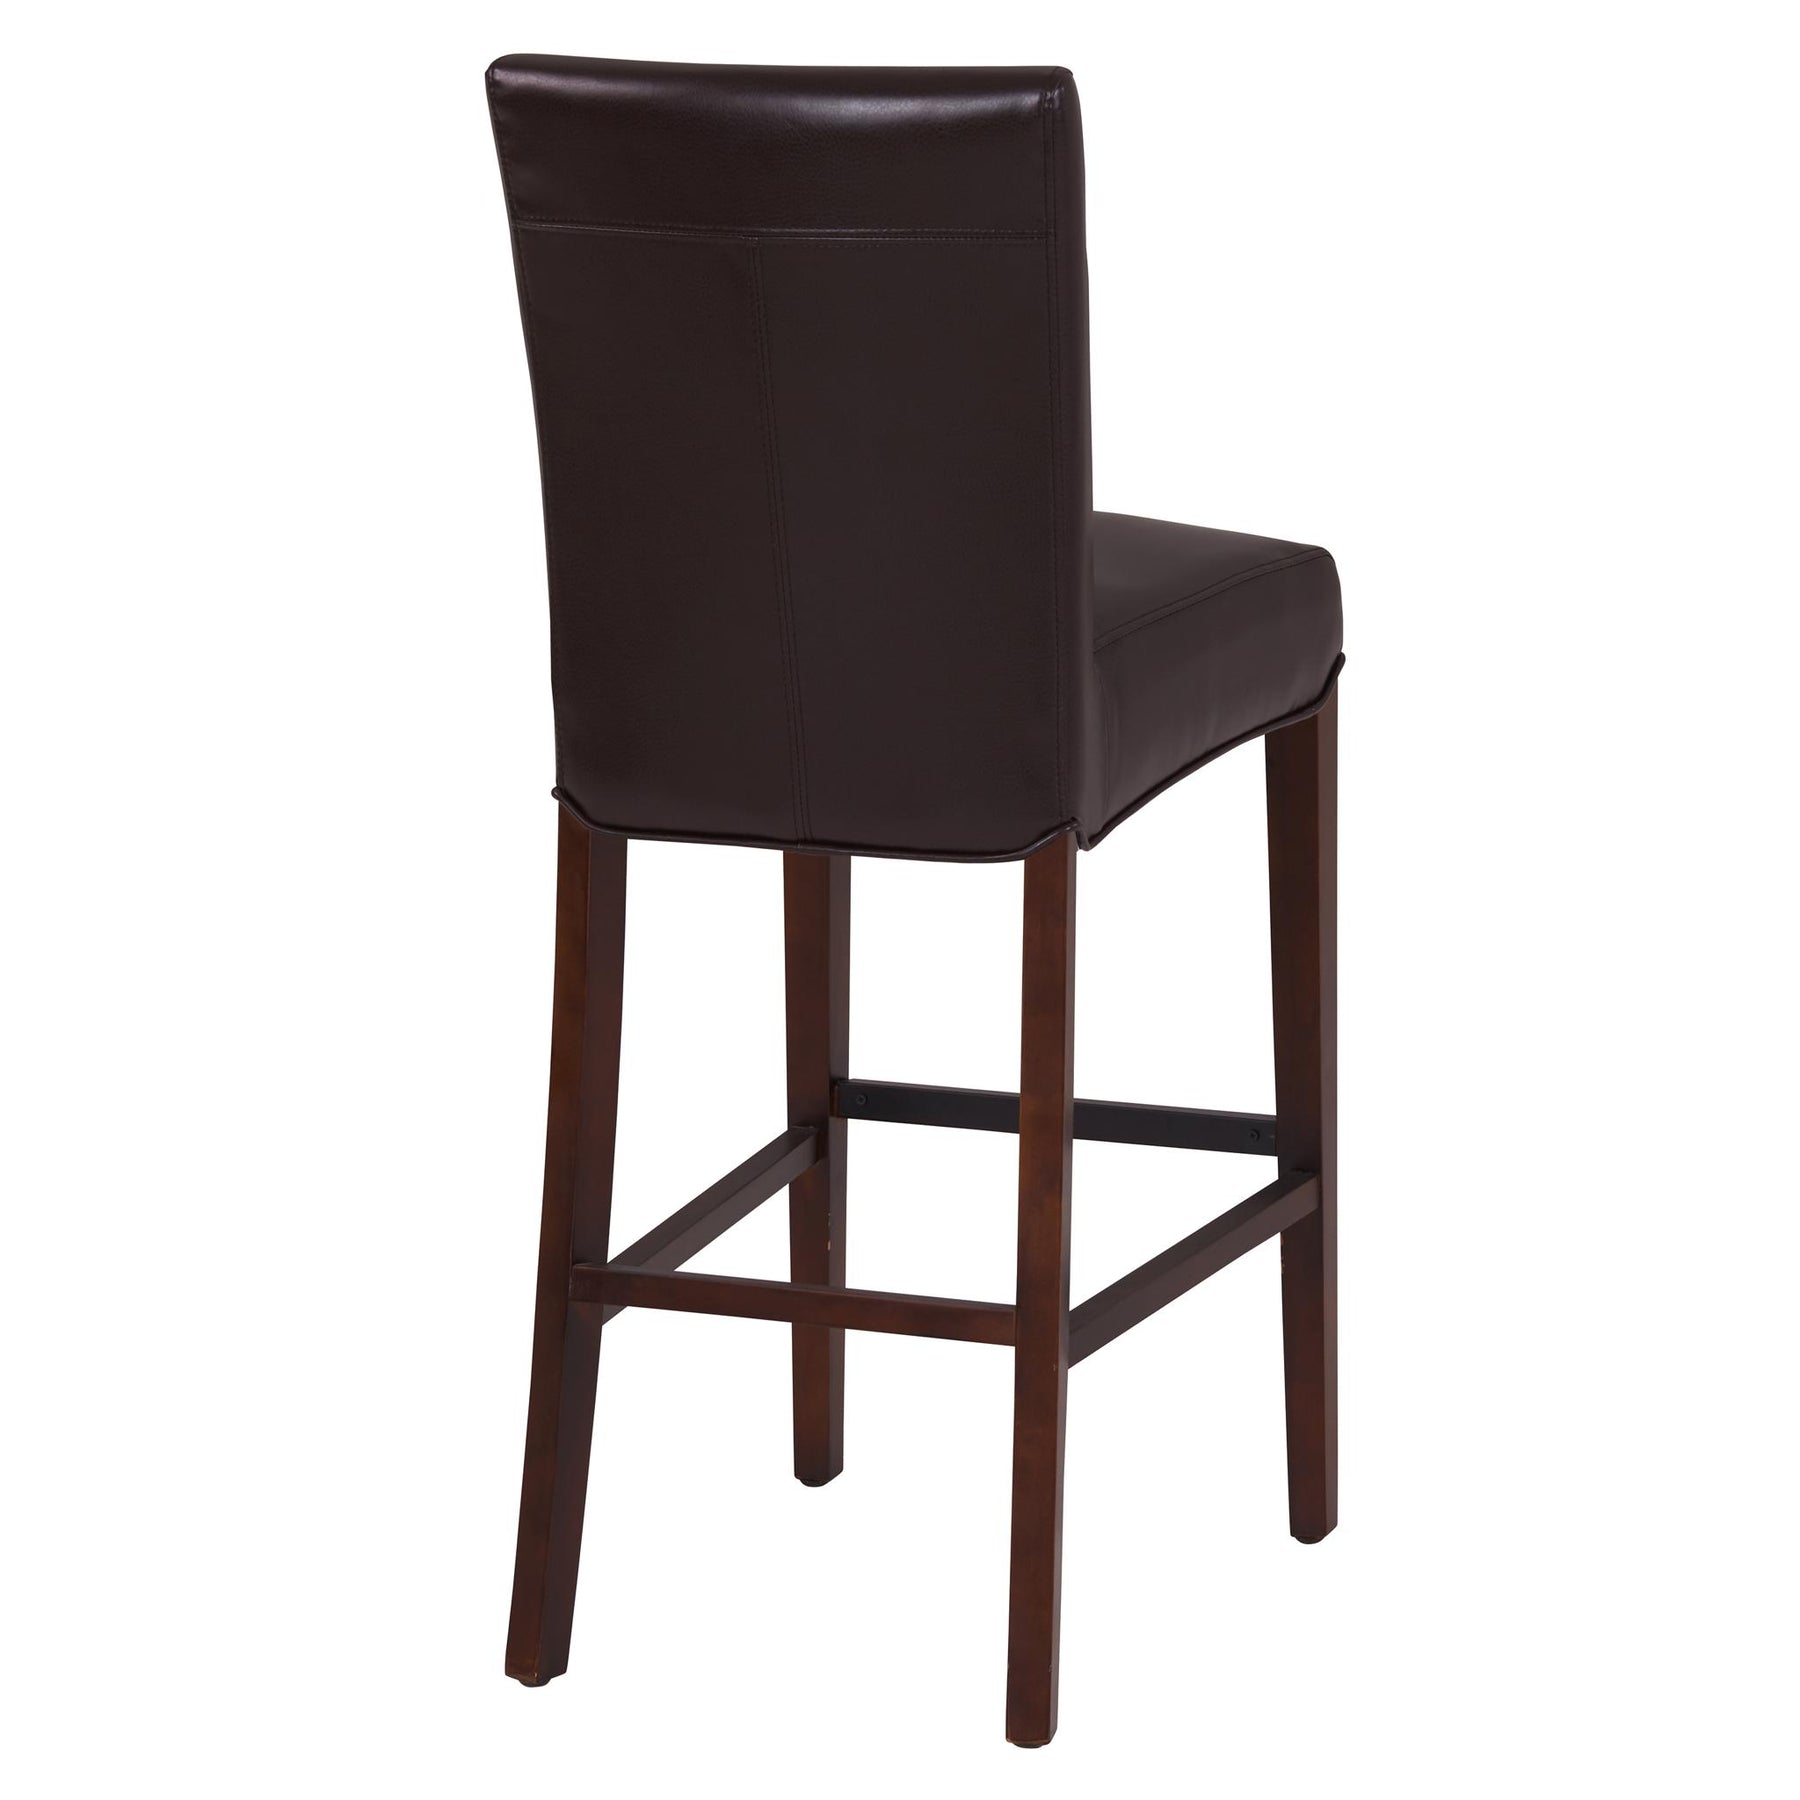 Milton Bonded Leather Bar Stool by New Pacific Direct - 268530B